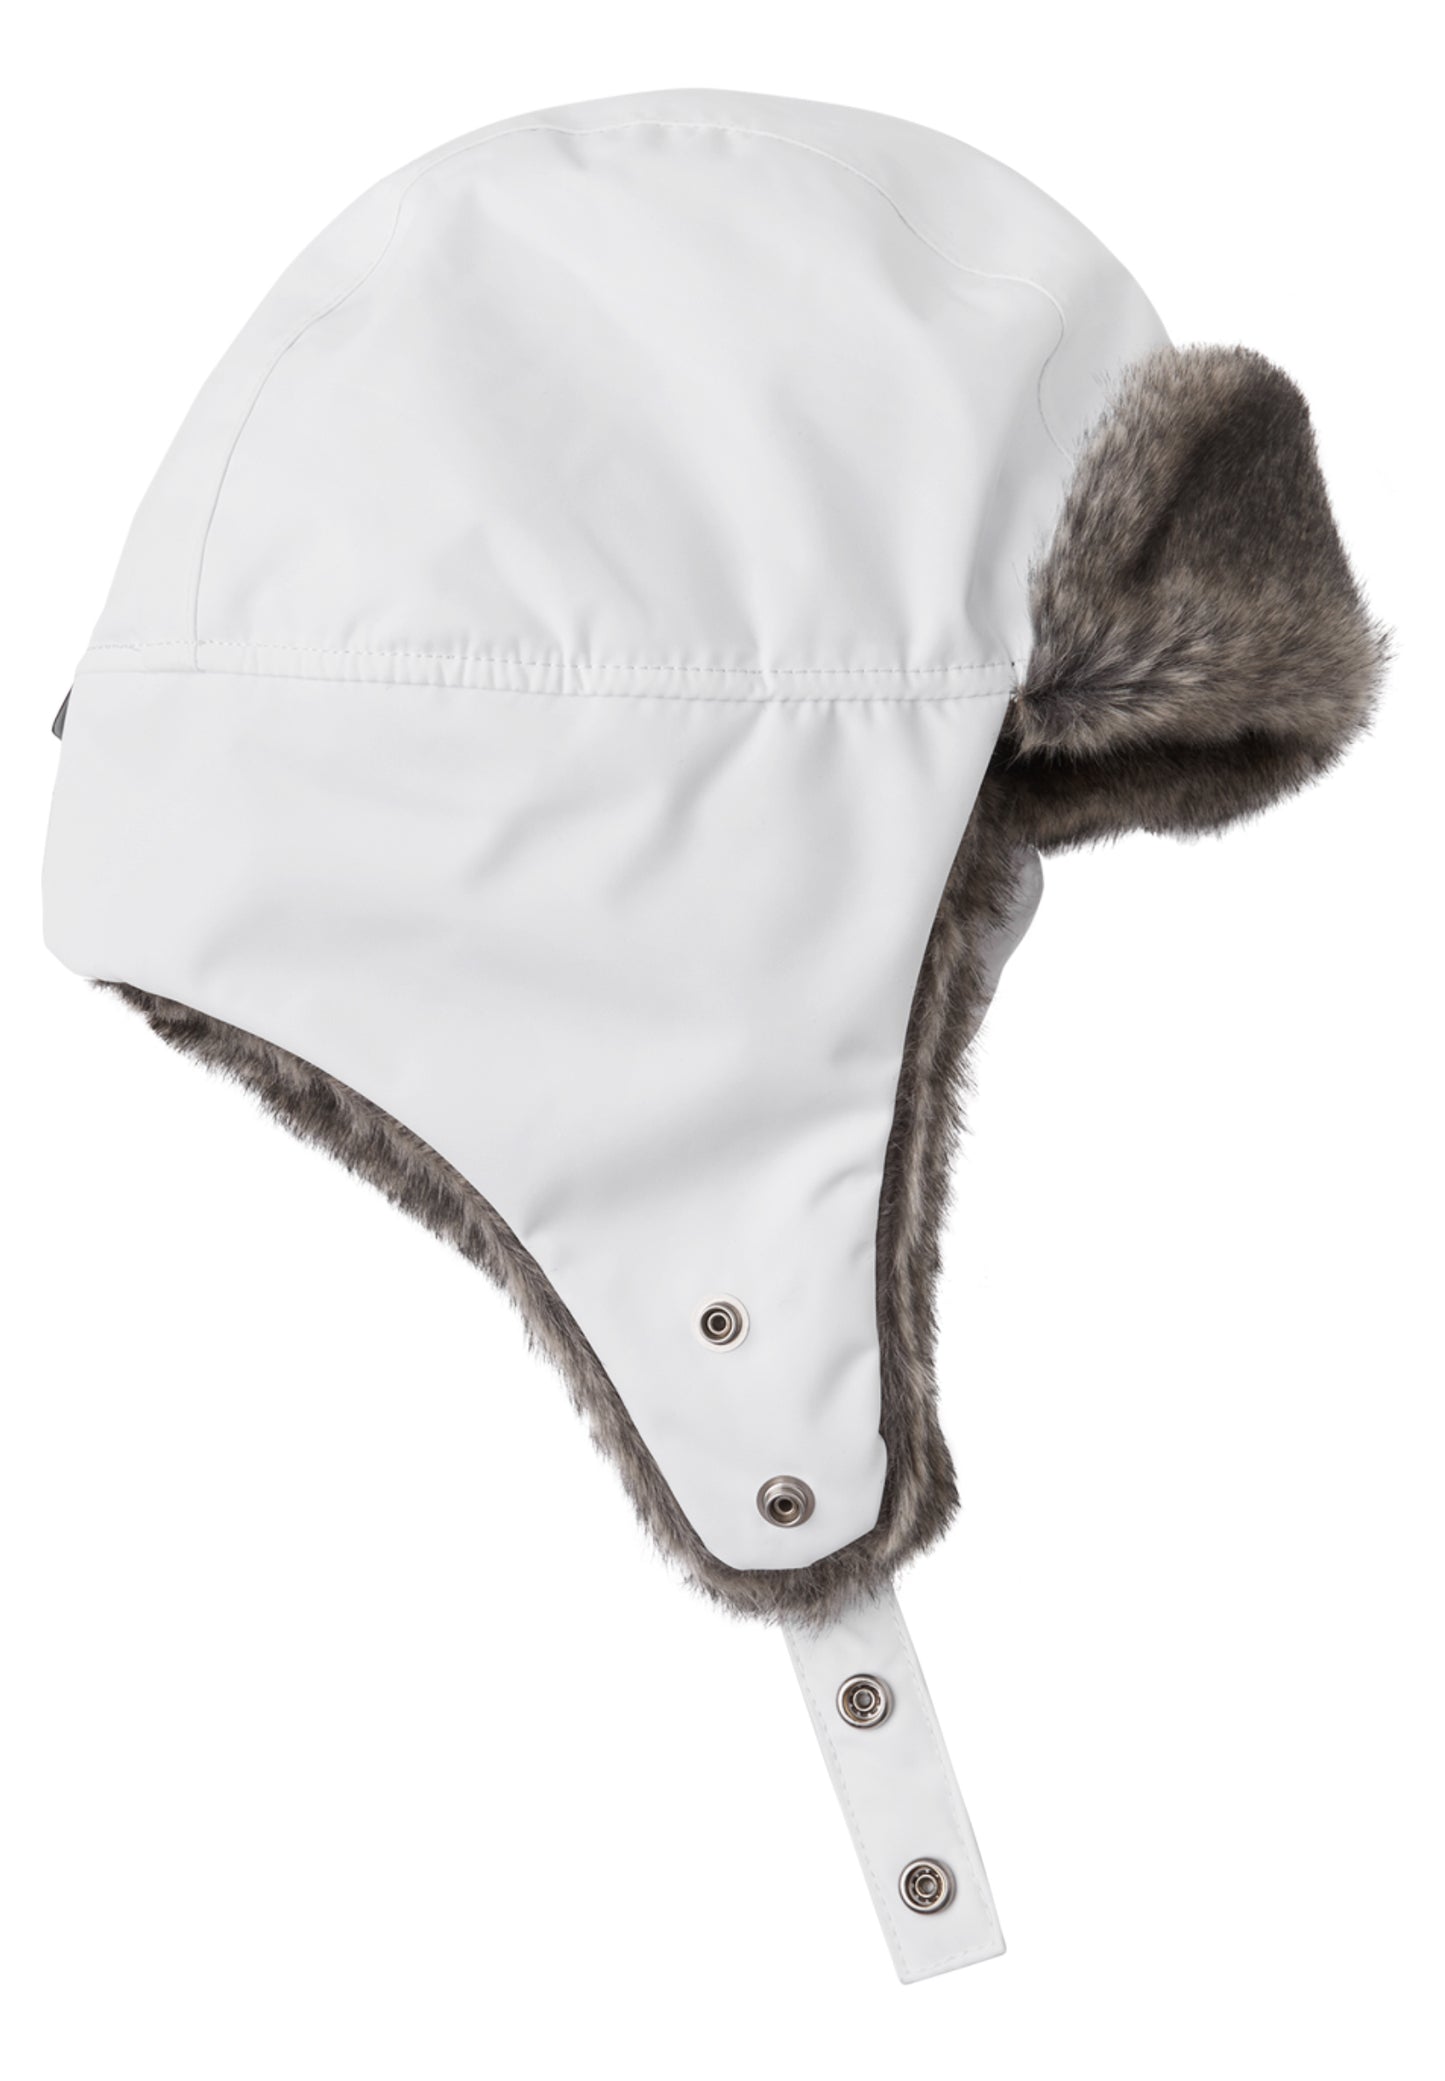 REIMA TEC hat with chin protection Ilves 528537 <br>Size 46, 50, 56<br> 100% waterproof, breathable<br>high quality faux fur, warm padding<br>windproof membrane